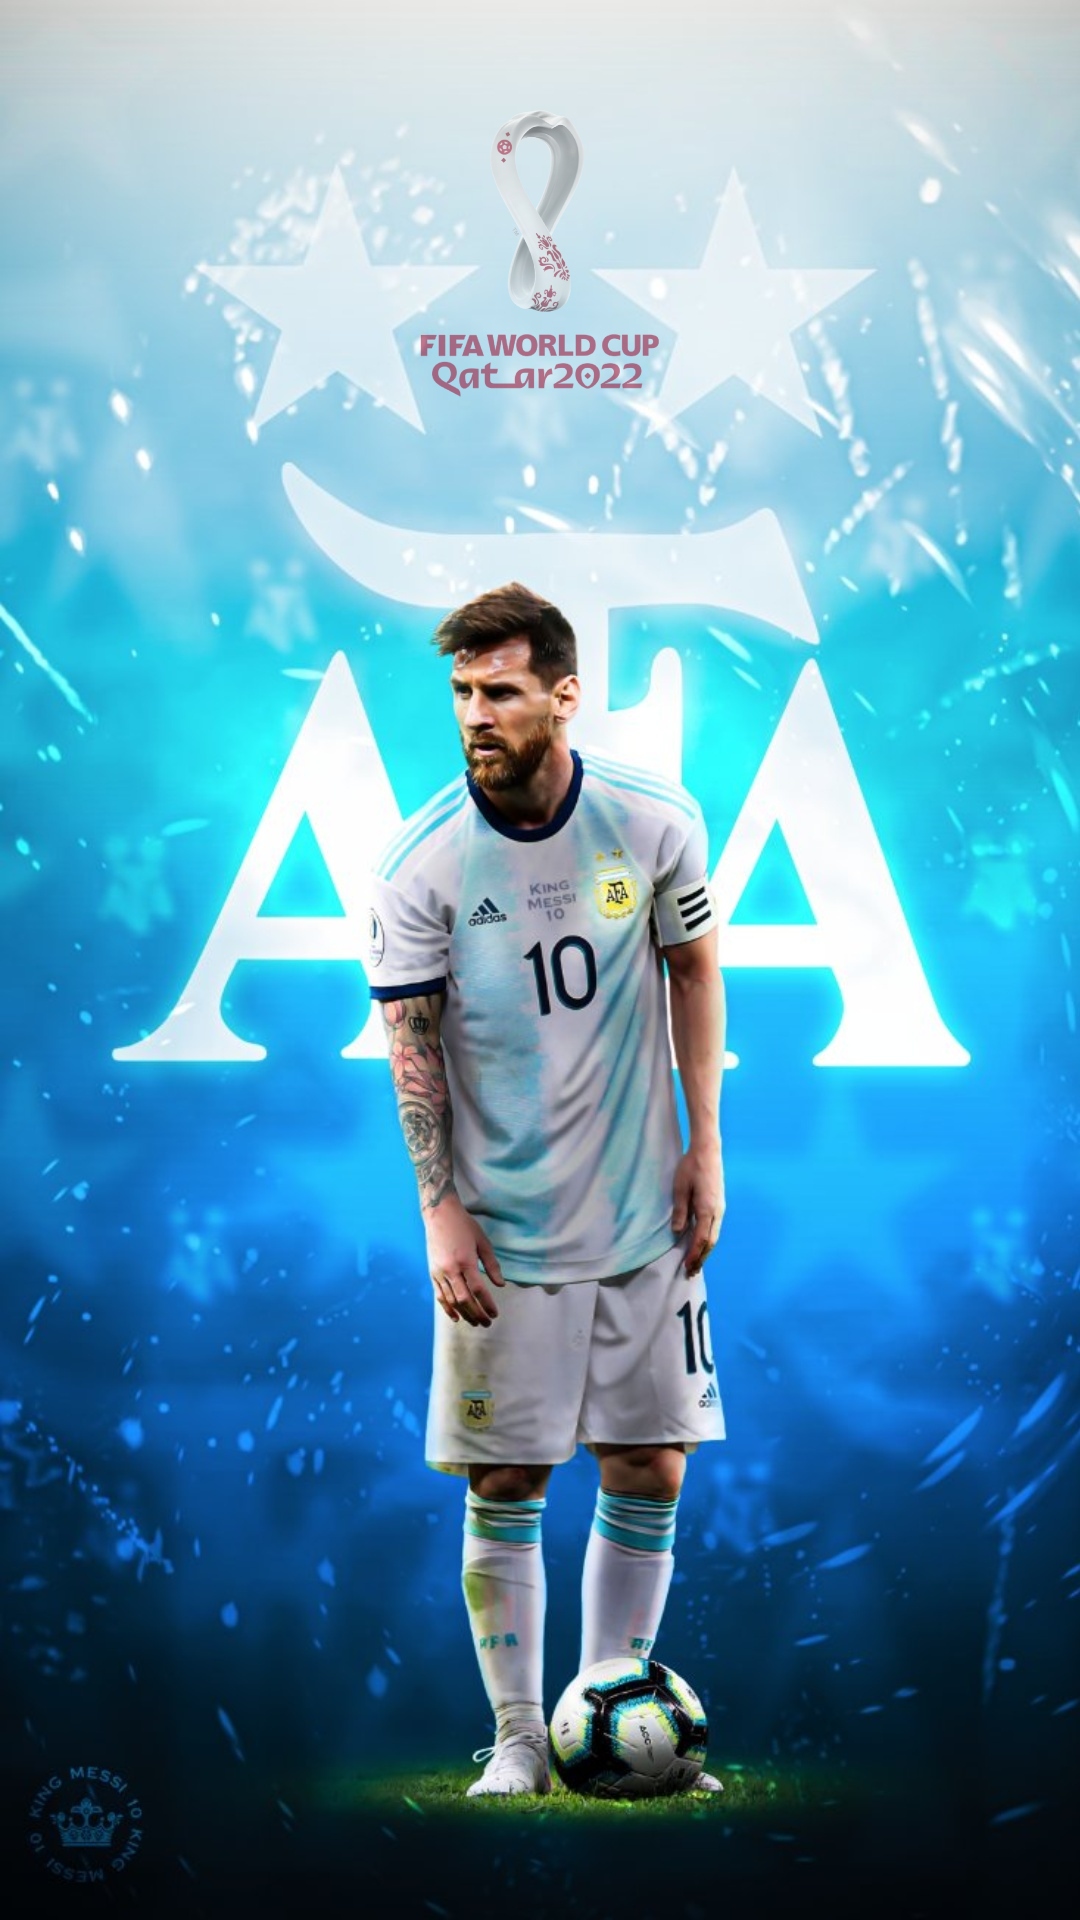 Lionel Messi  Argentina  World Cup 2022  Football Sports Poster  Art  Prints by Tallenge  Buy Posters Frames Canvas  Digital Art Prints   Small Compact Medium and Large Variants